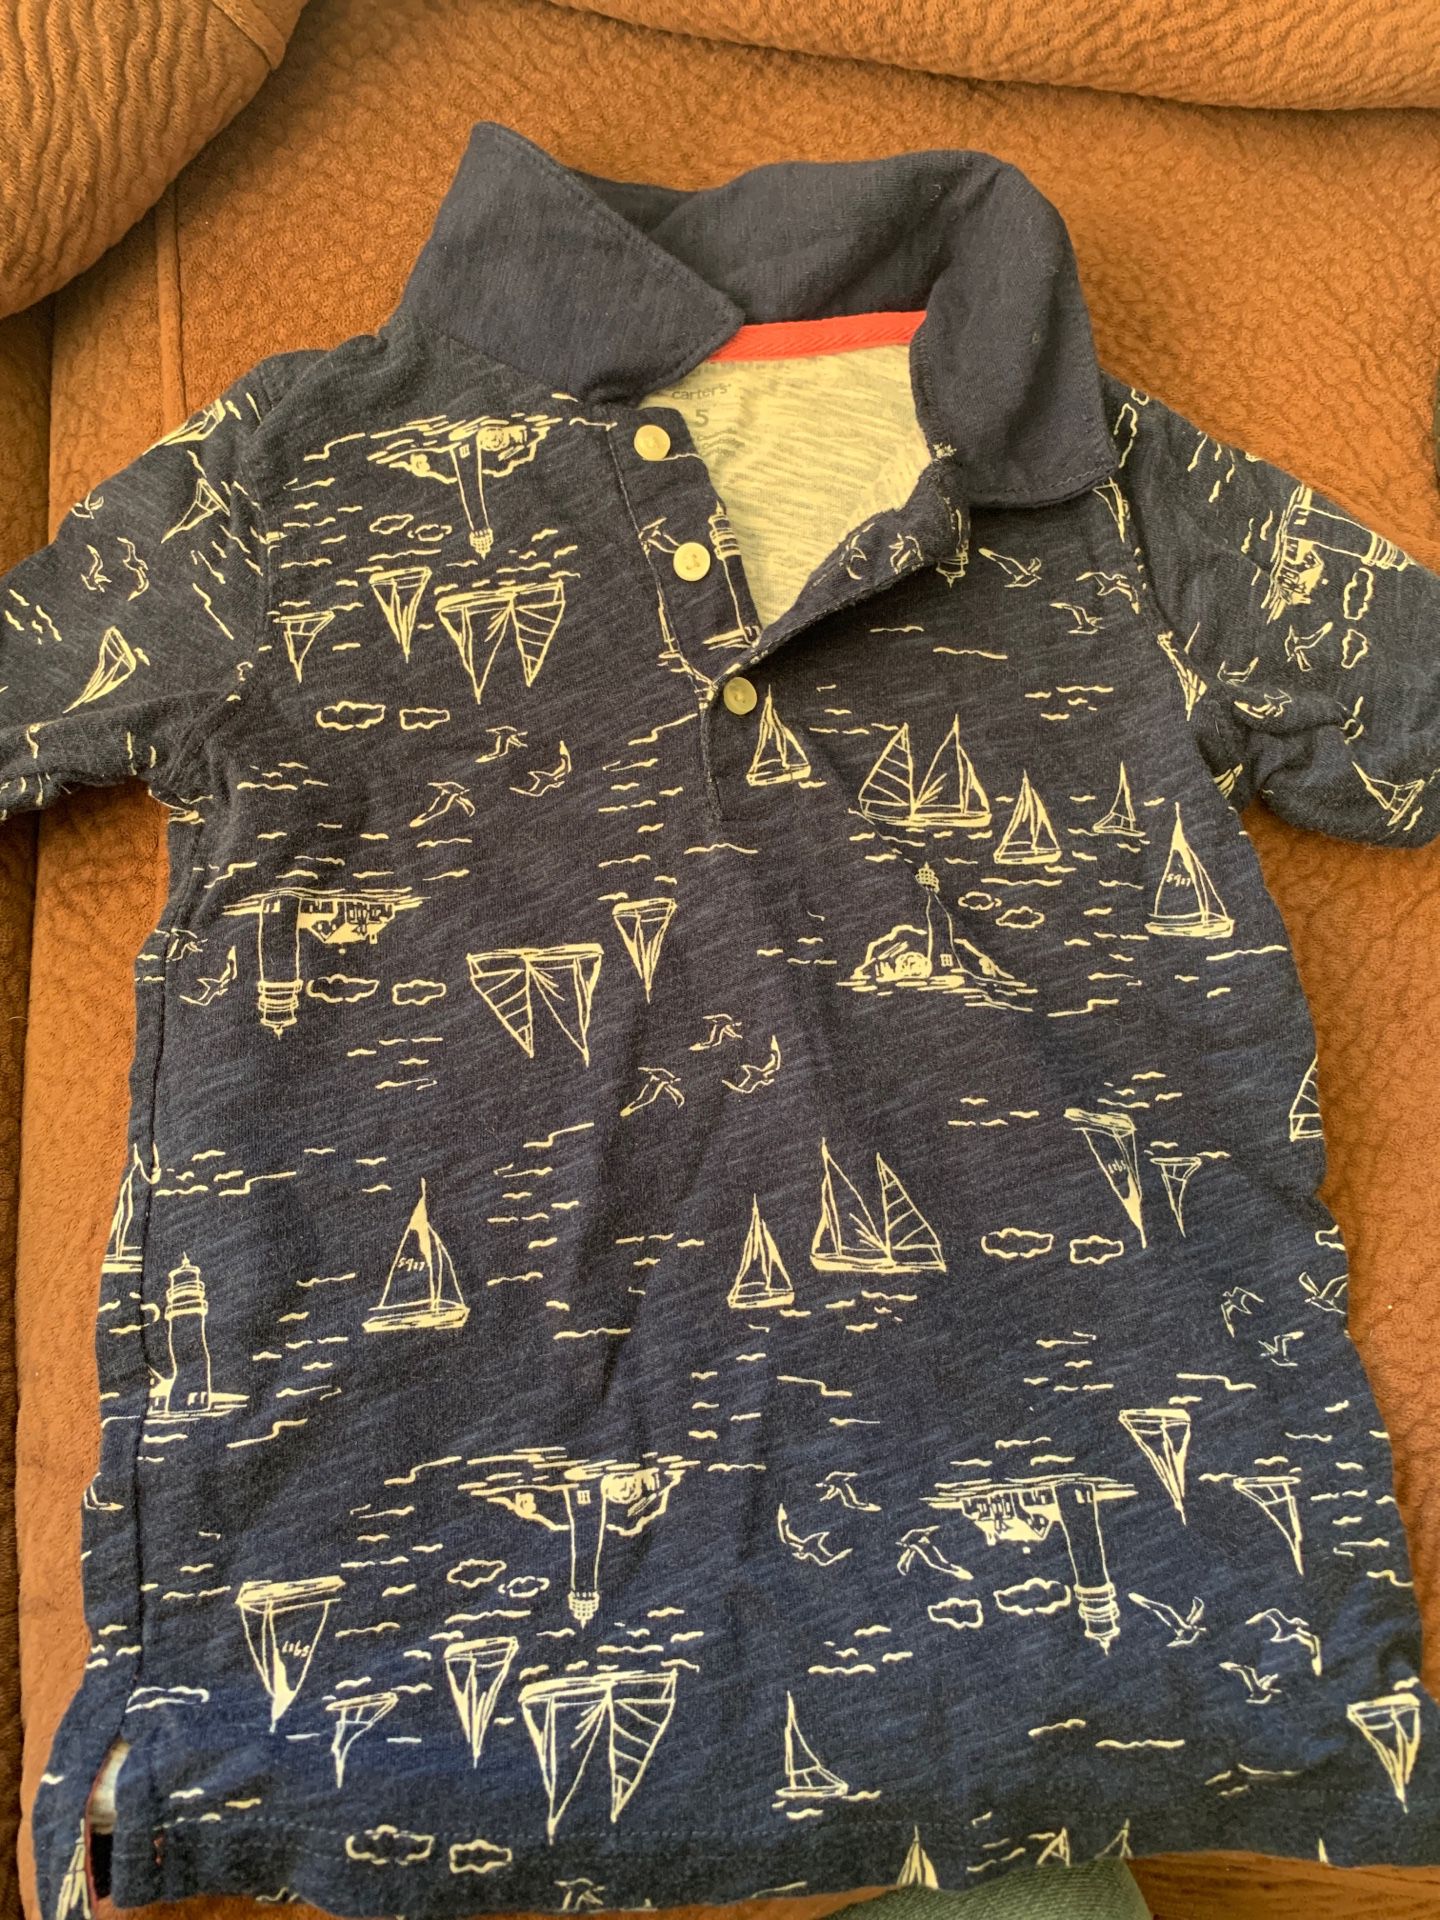 Size 5 in boys t-shirt